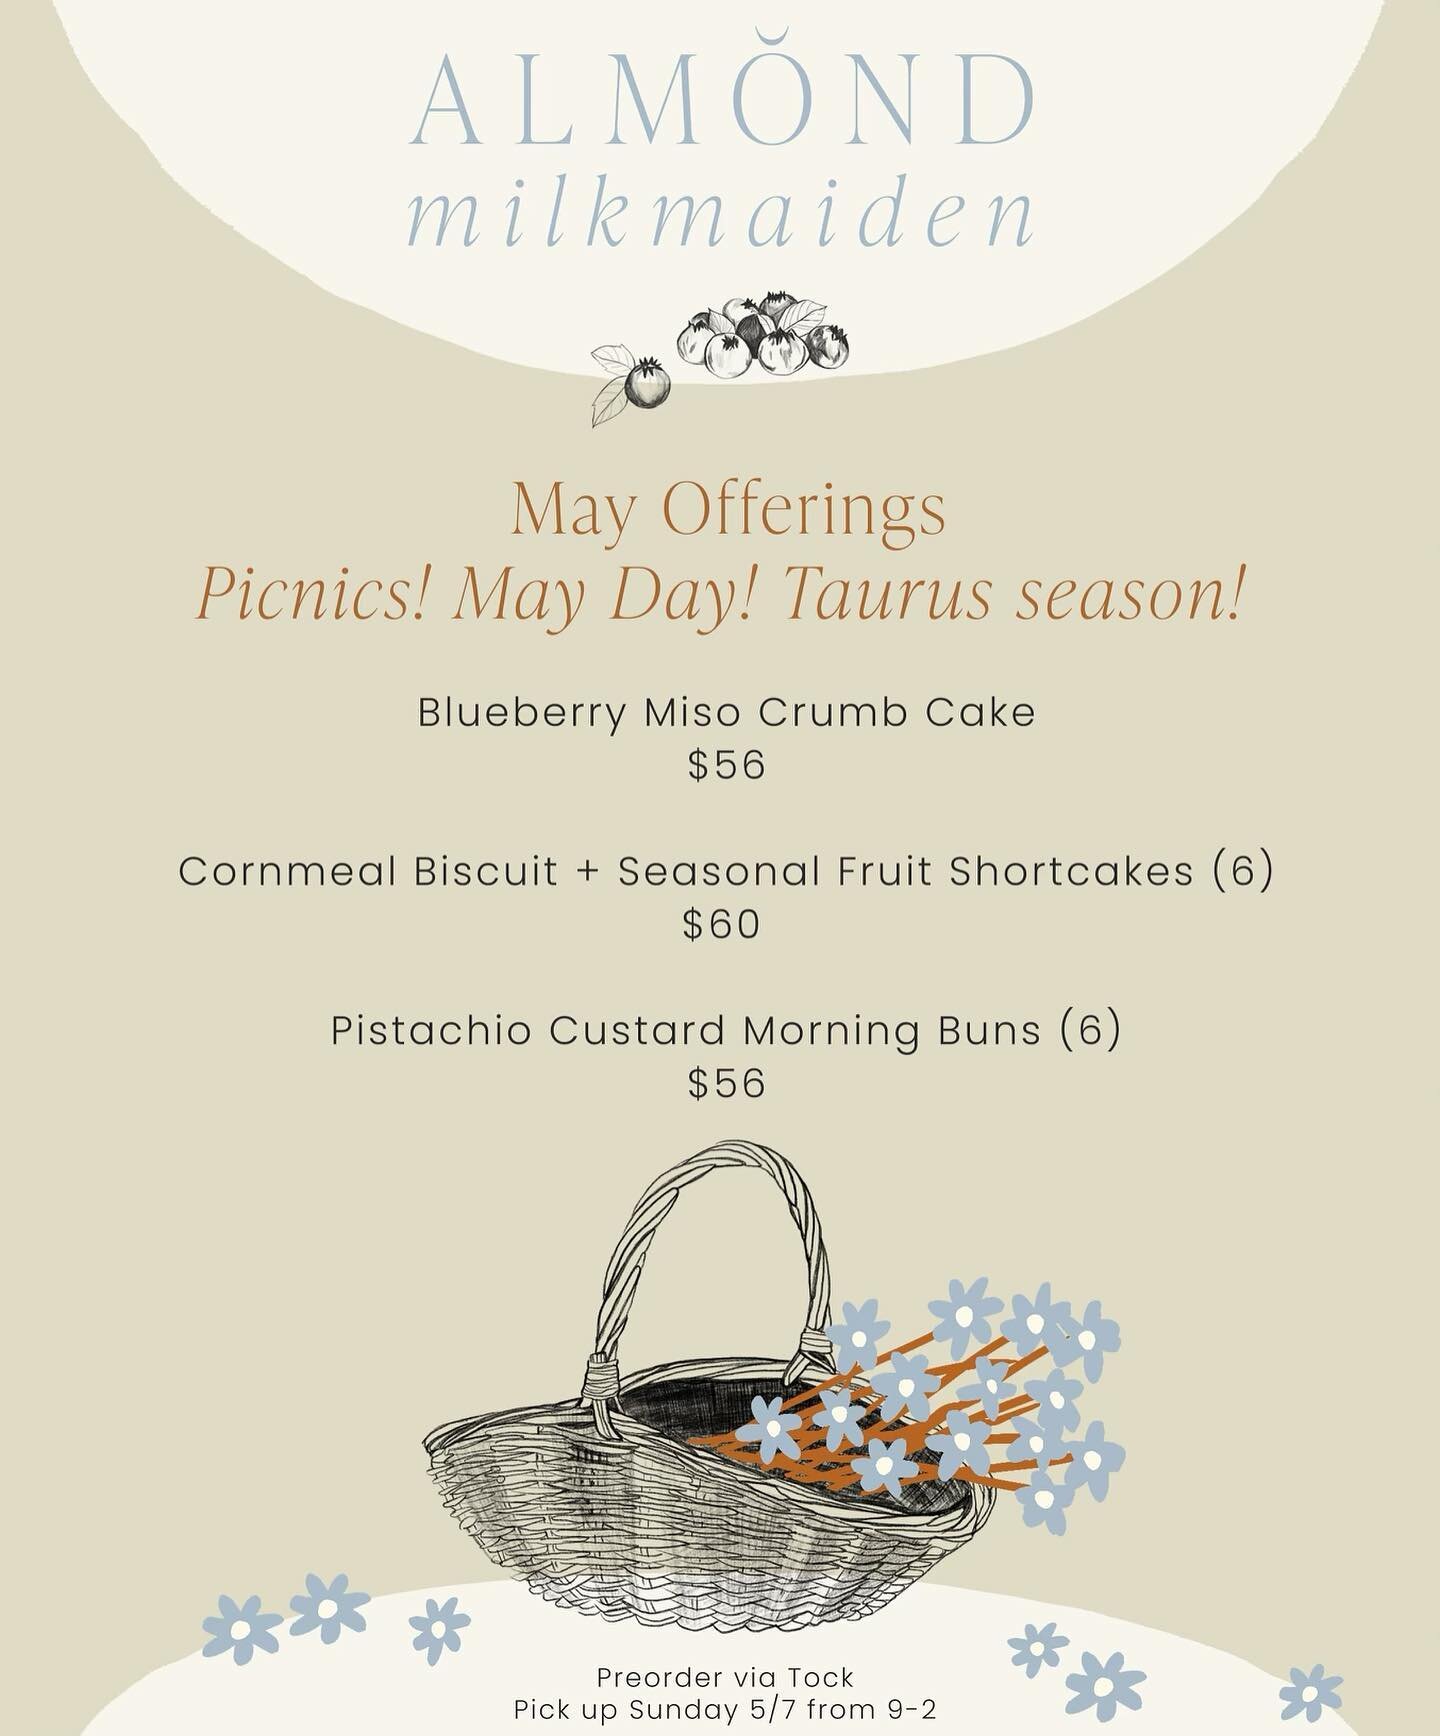 It&rsquo;s gonna be May ya&rsquo;ll 🌼😛🌼😛 And Emily&rsquo;s bringing you a springy selection of baked goods for any/all occasions! Preorder is on till Friday 5/5 via Tock for pickup Sunday 5/7 9-2 !! Select the 2:00 slot, but come anytime in that 